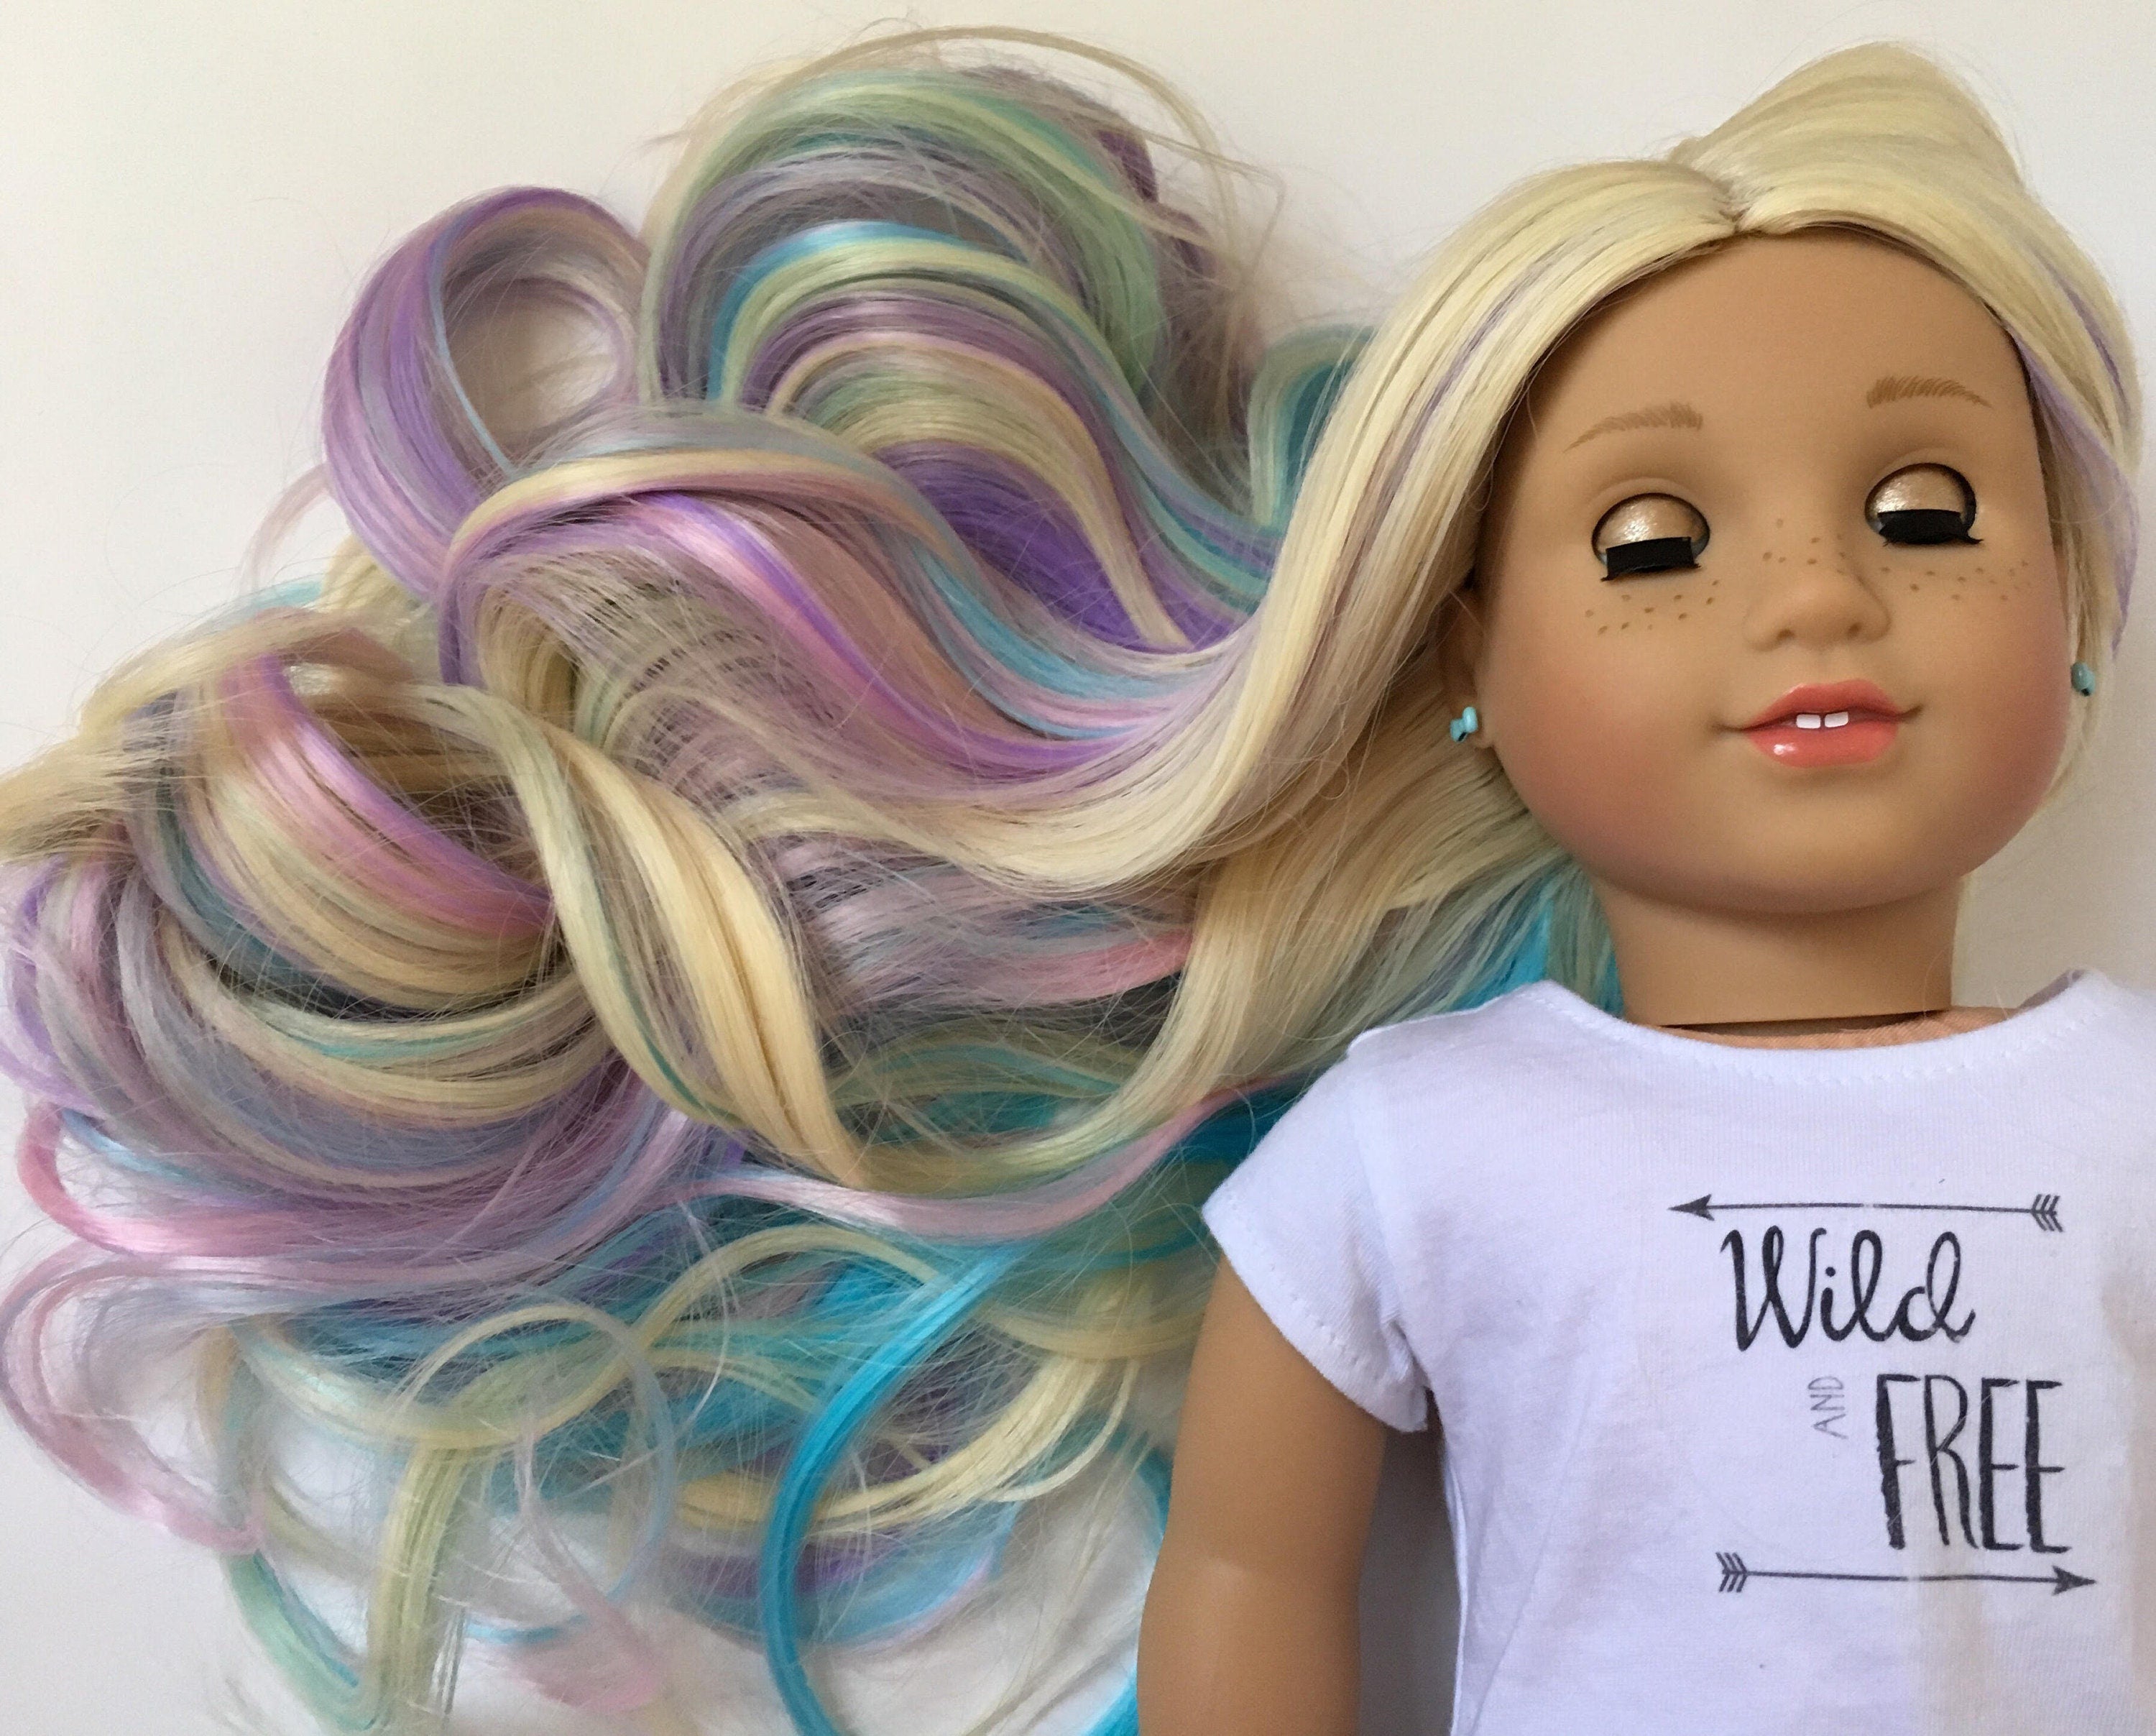 How I made my own American Girl Doll Wig 